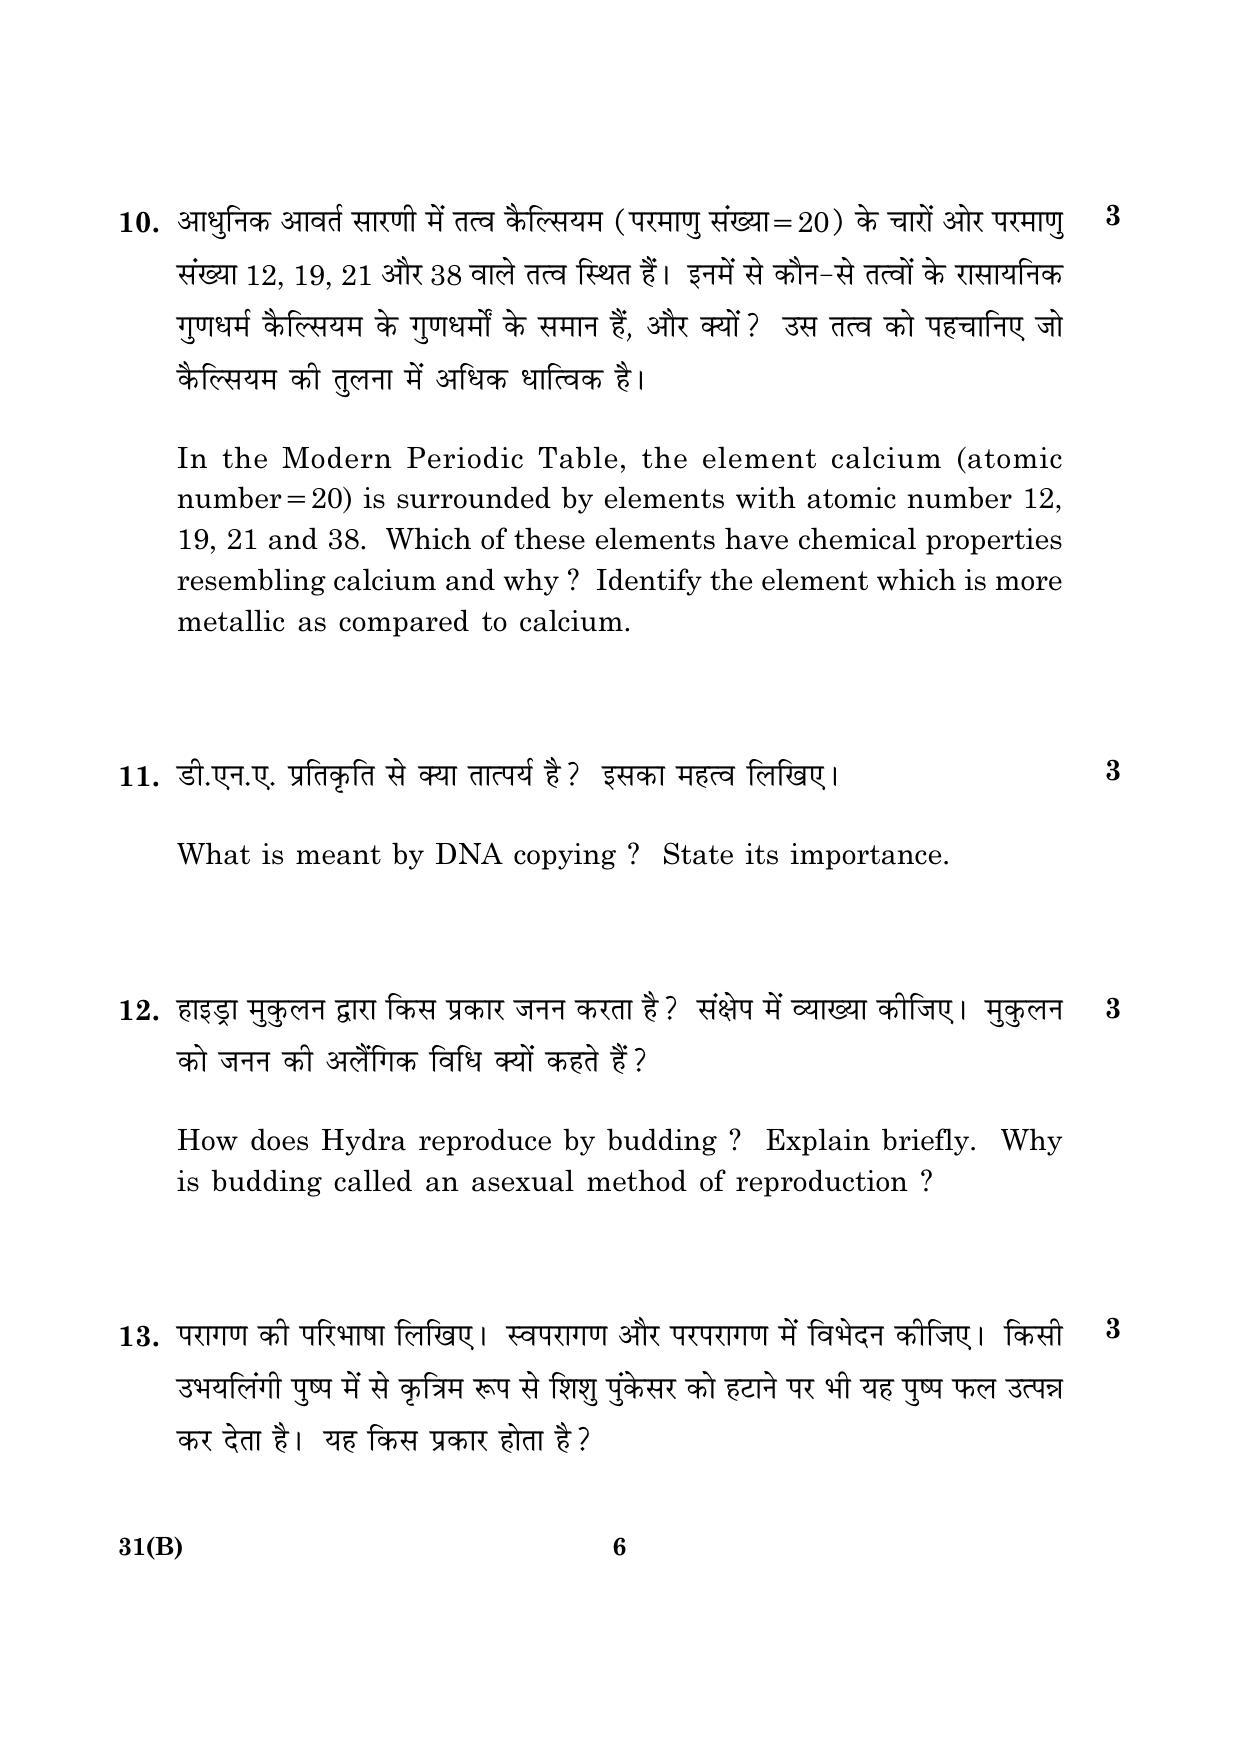 CBSE Class 10 031(B) Science 2016 Question Paper - Page 6